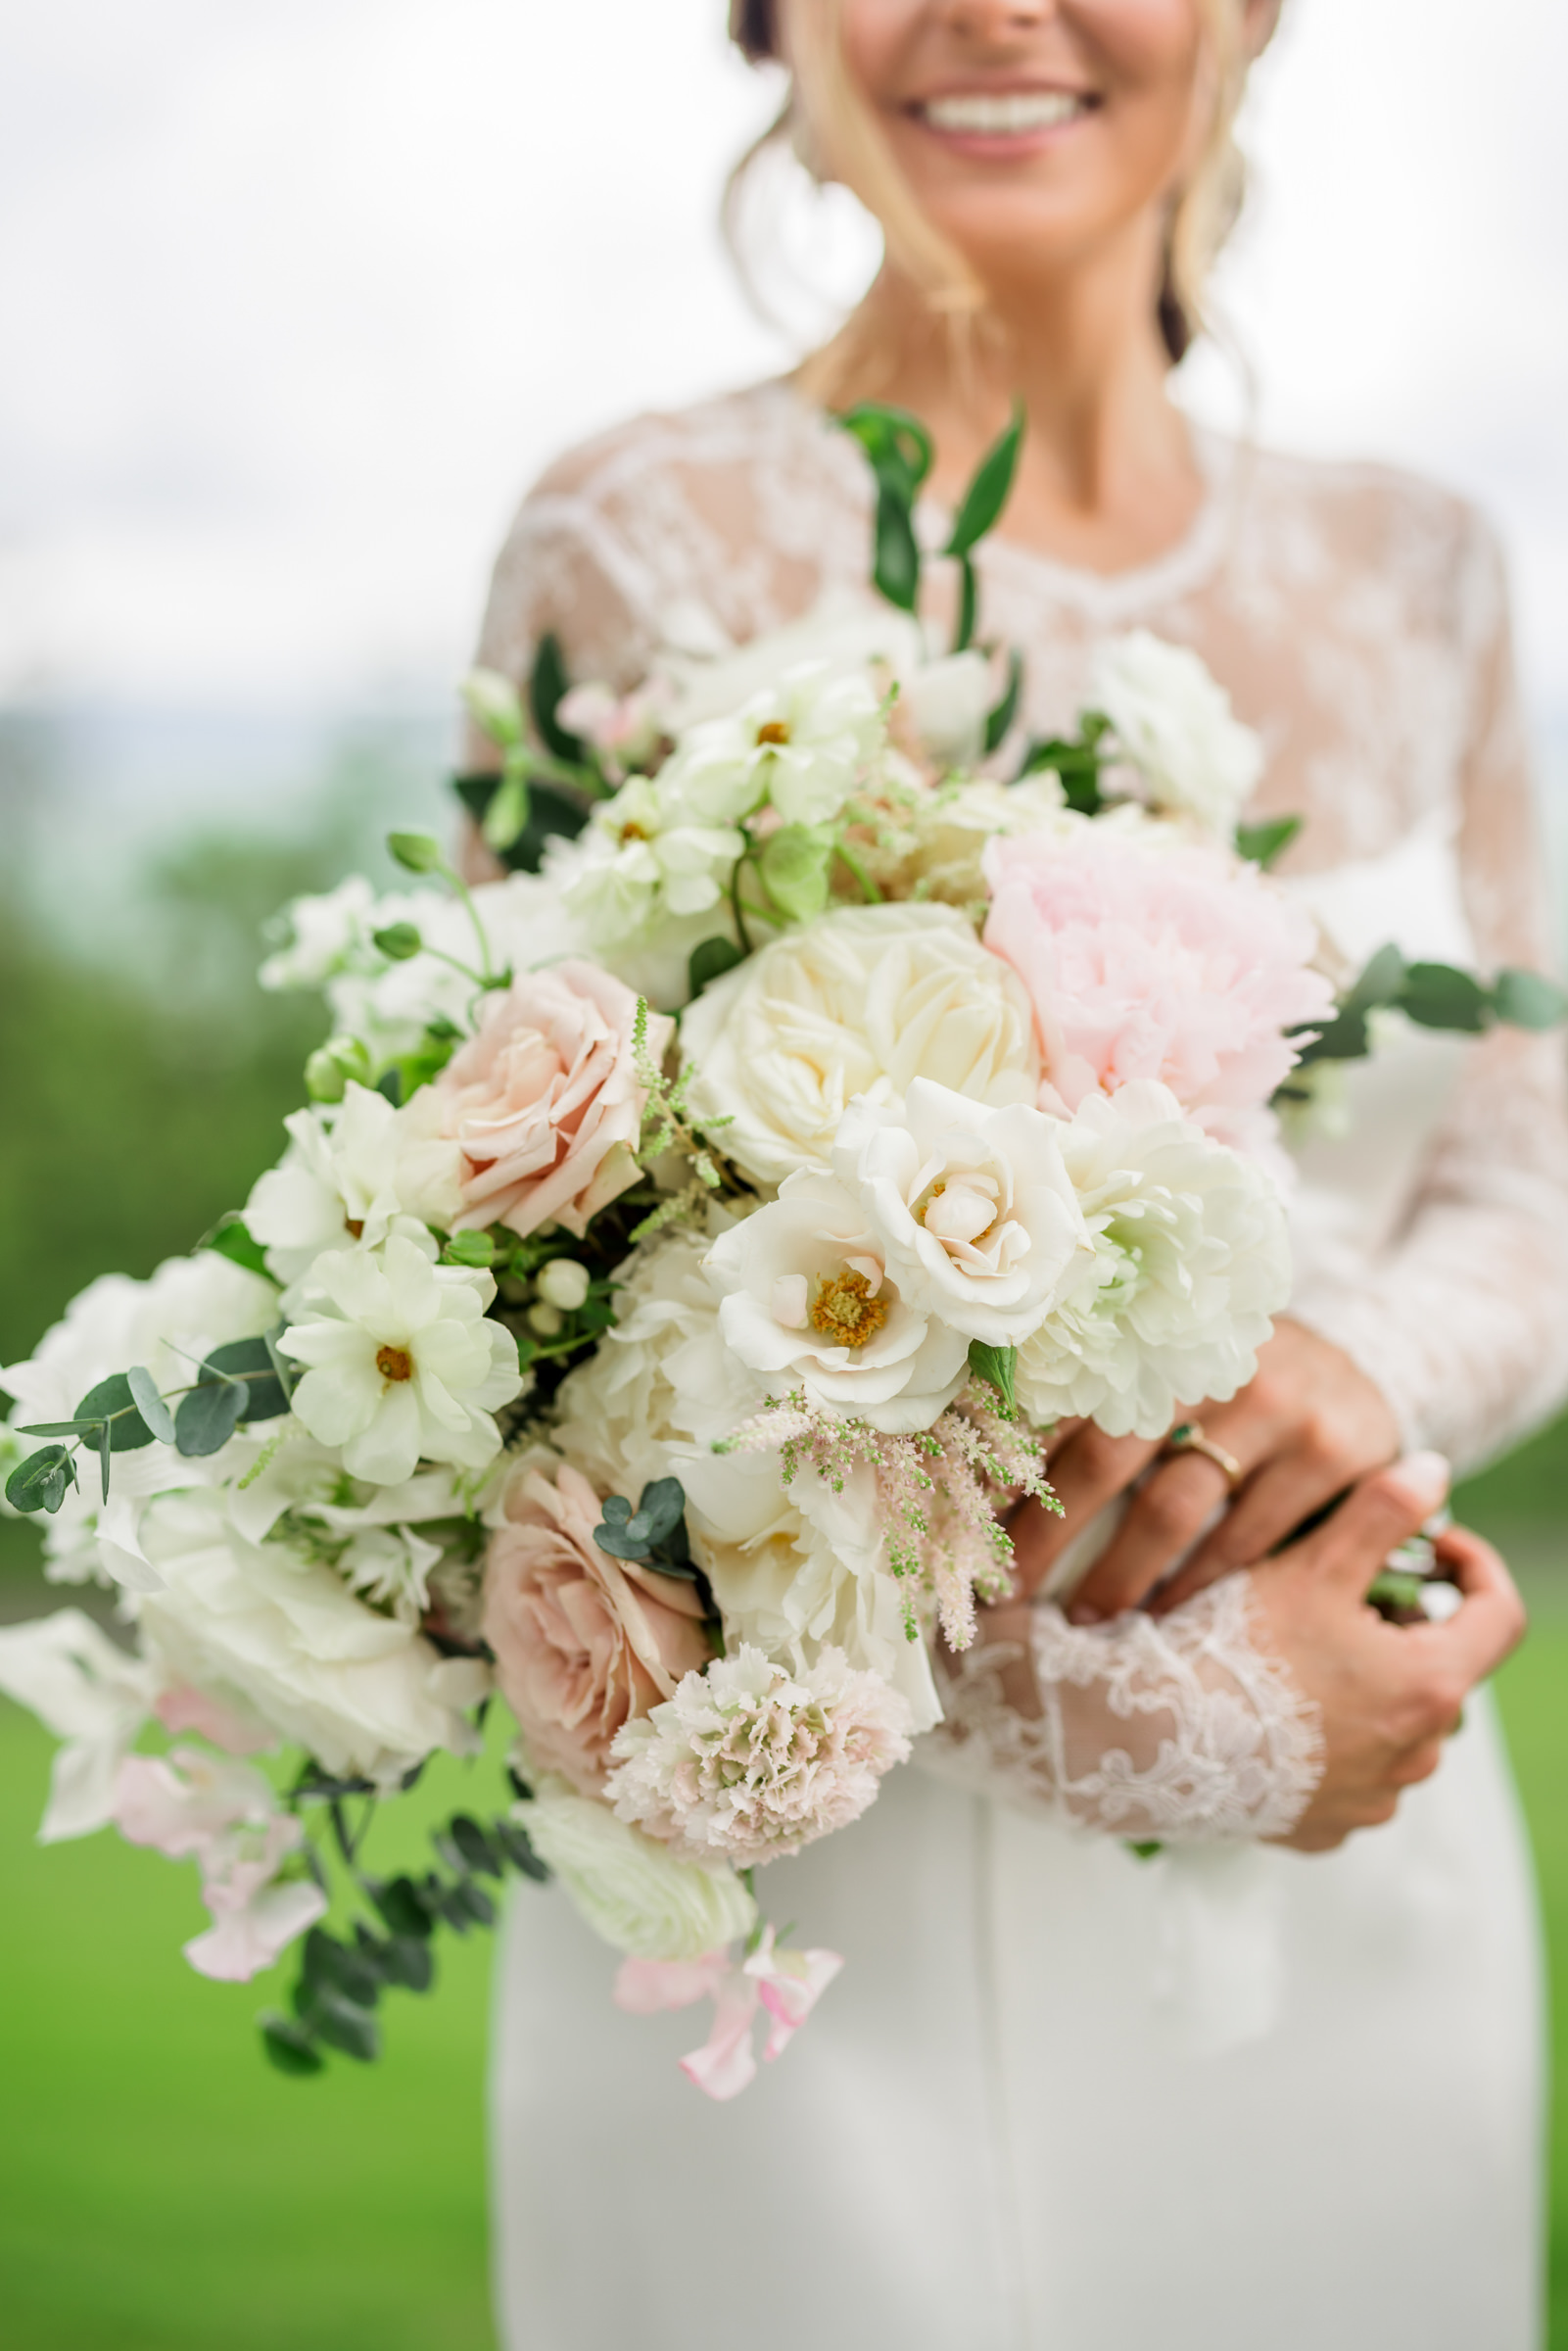 bride holding bouquet with white and pink flowers